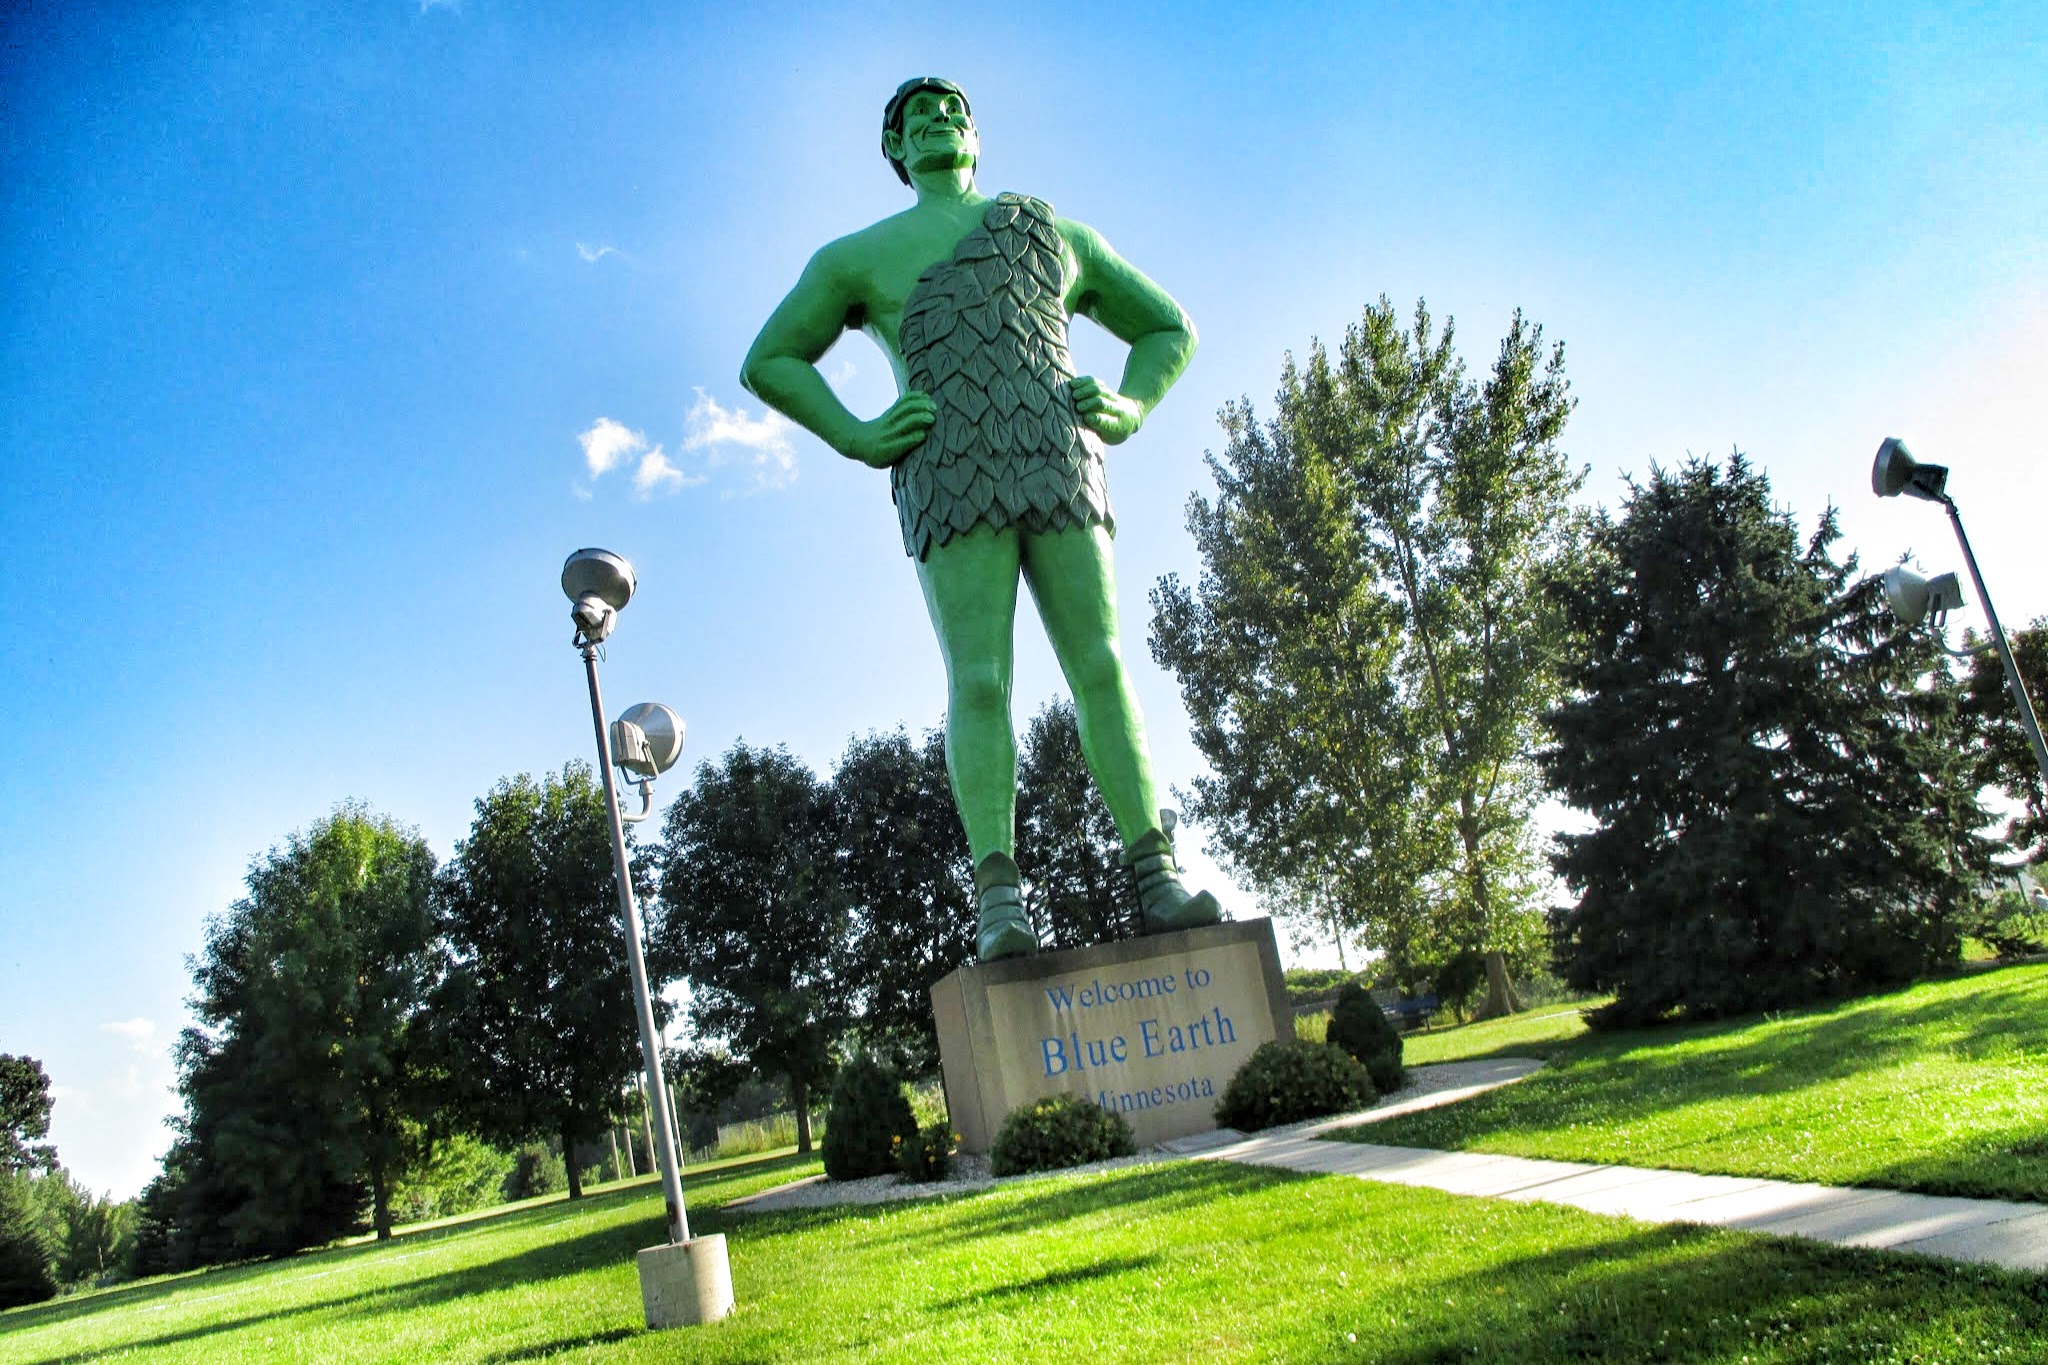 green giant statue park